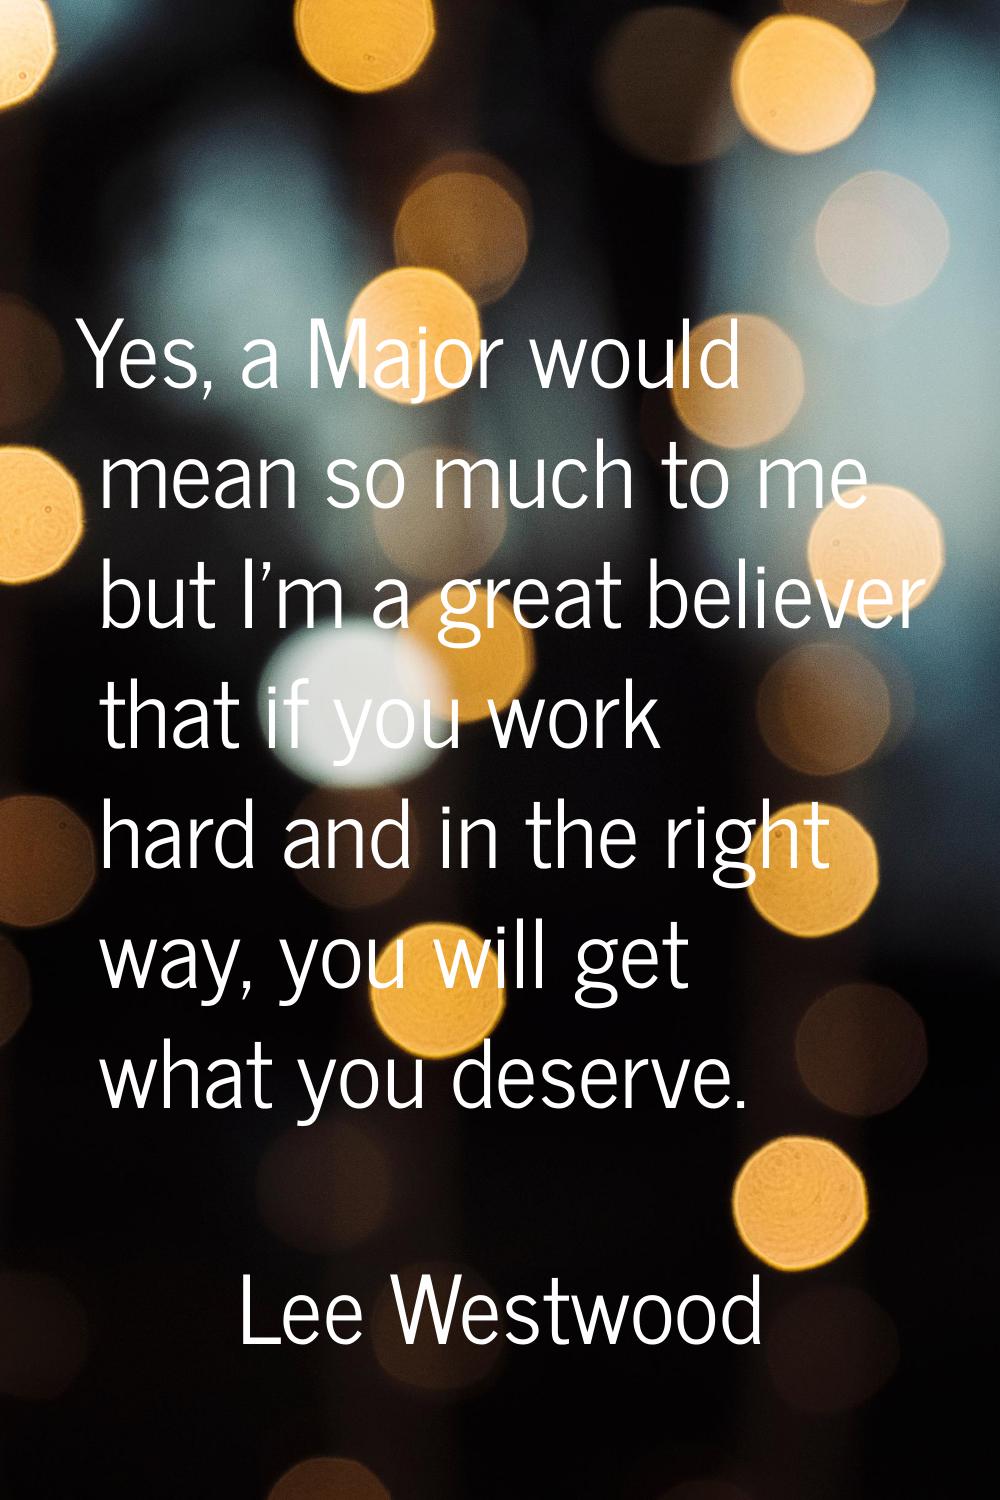 Yes, a Major would mean so much to me but I'm a great believer that if you work hard and in the rig